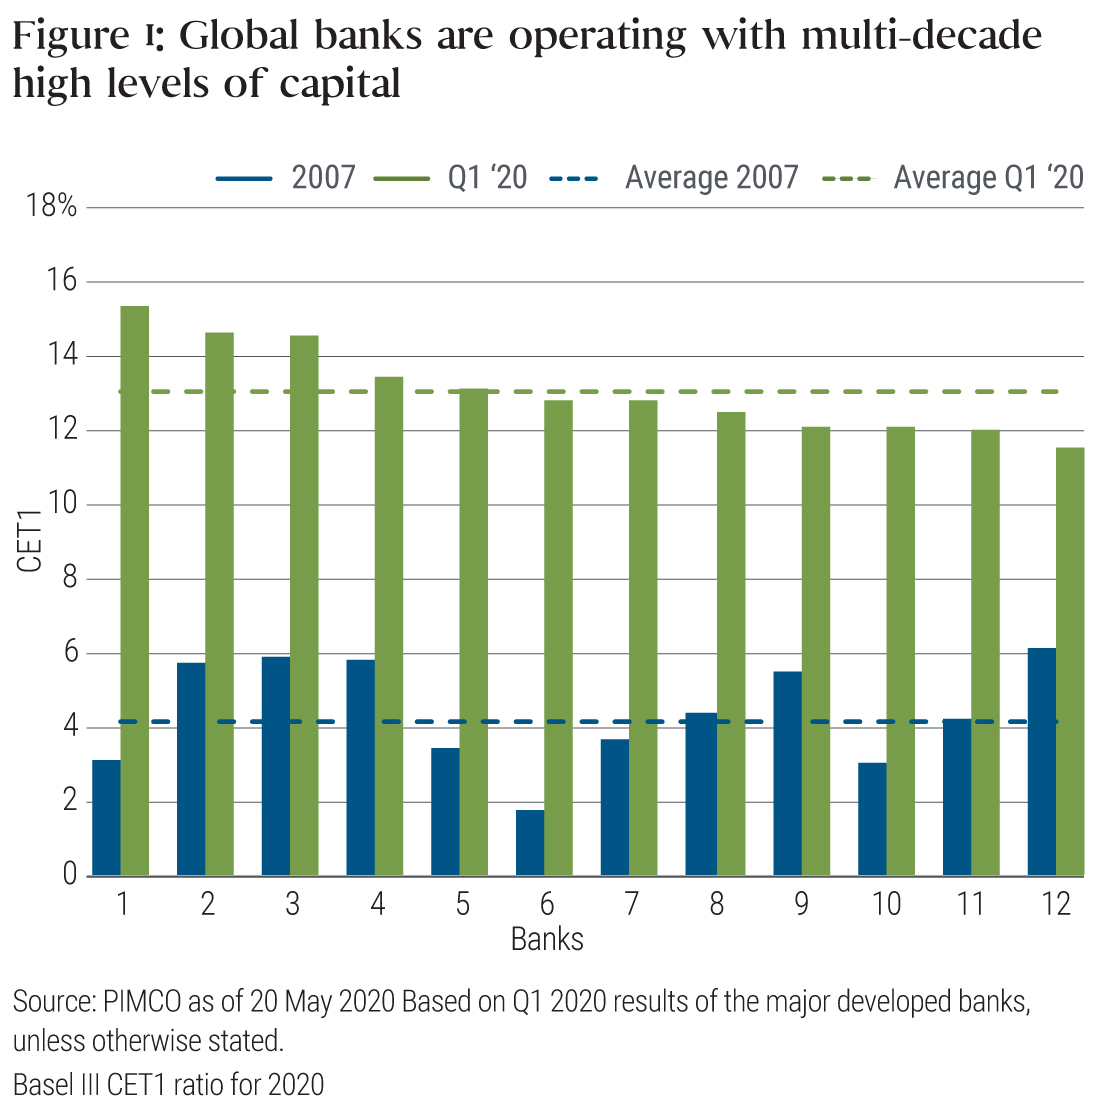 Global banks are operating with multi-decade high levels of capital